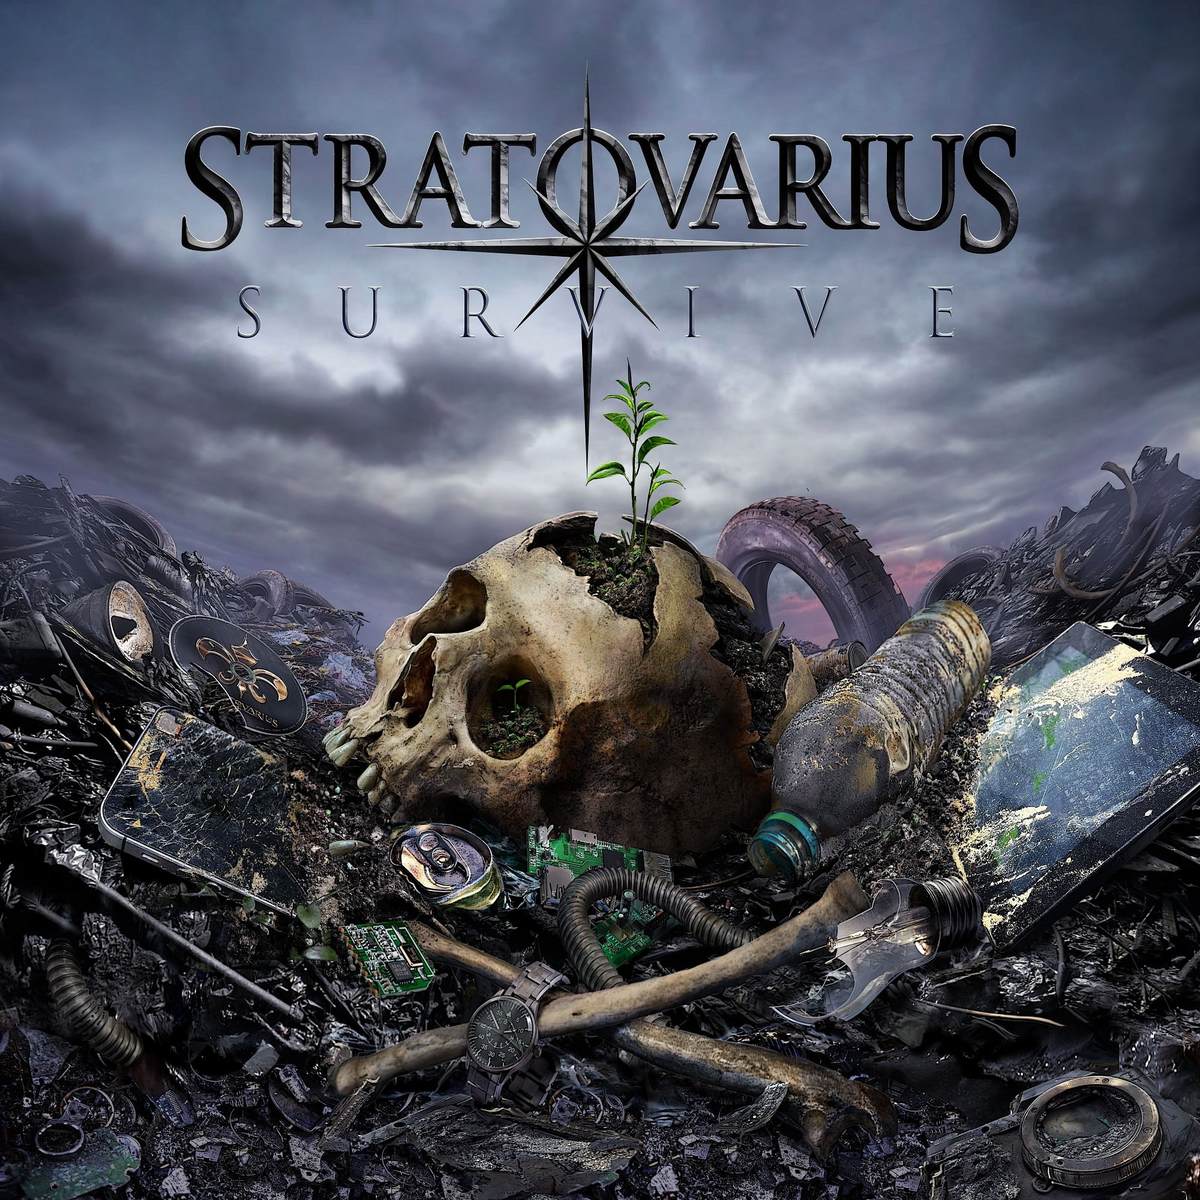 Art for Firefly by Stratovarius